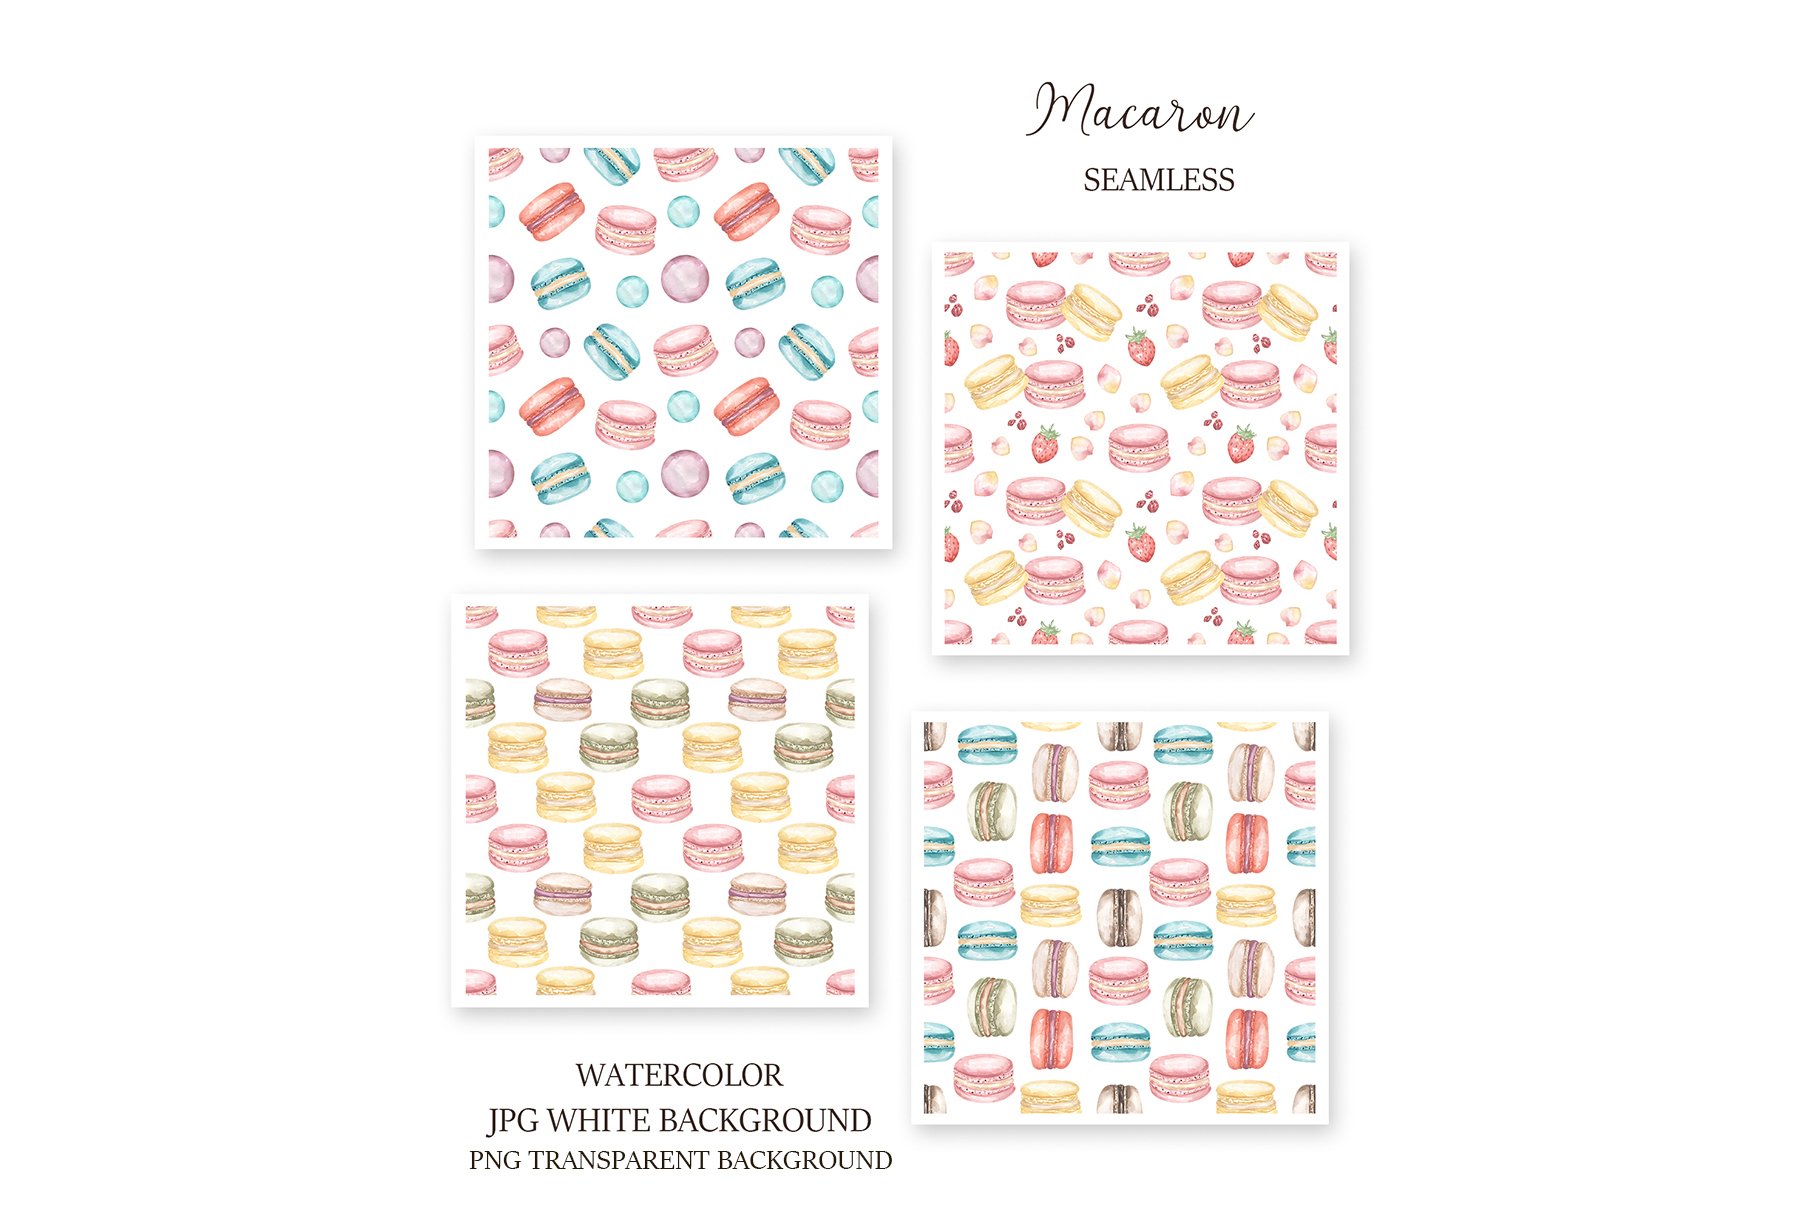 Four patterns options with macaroons patterns.